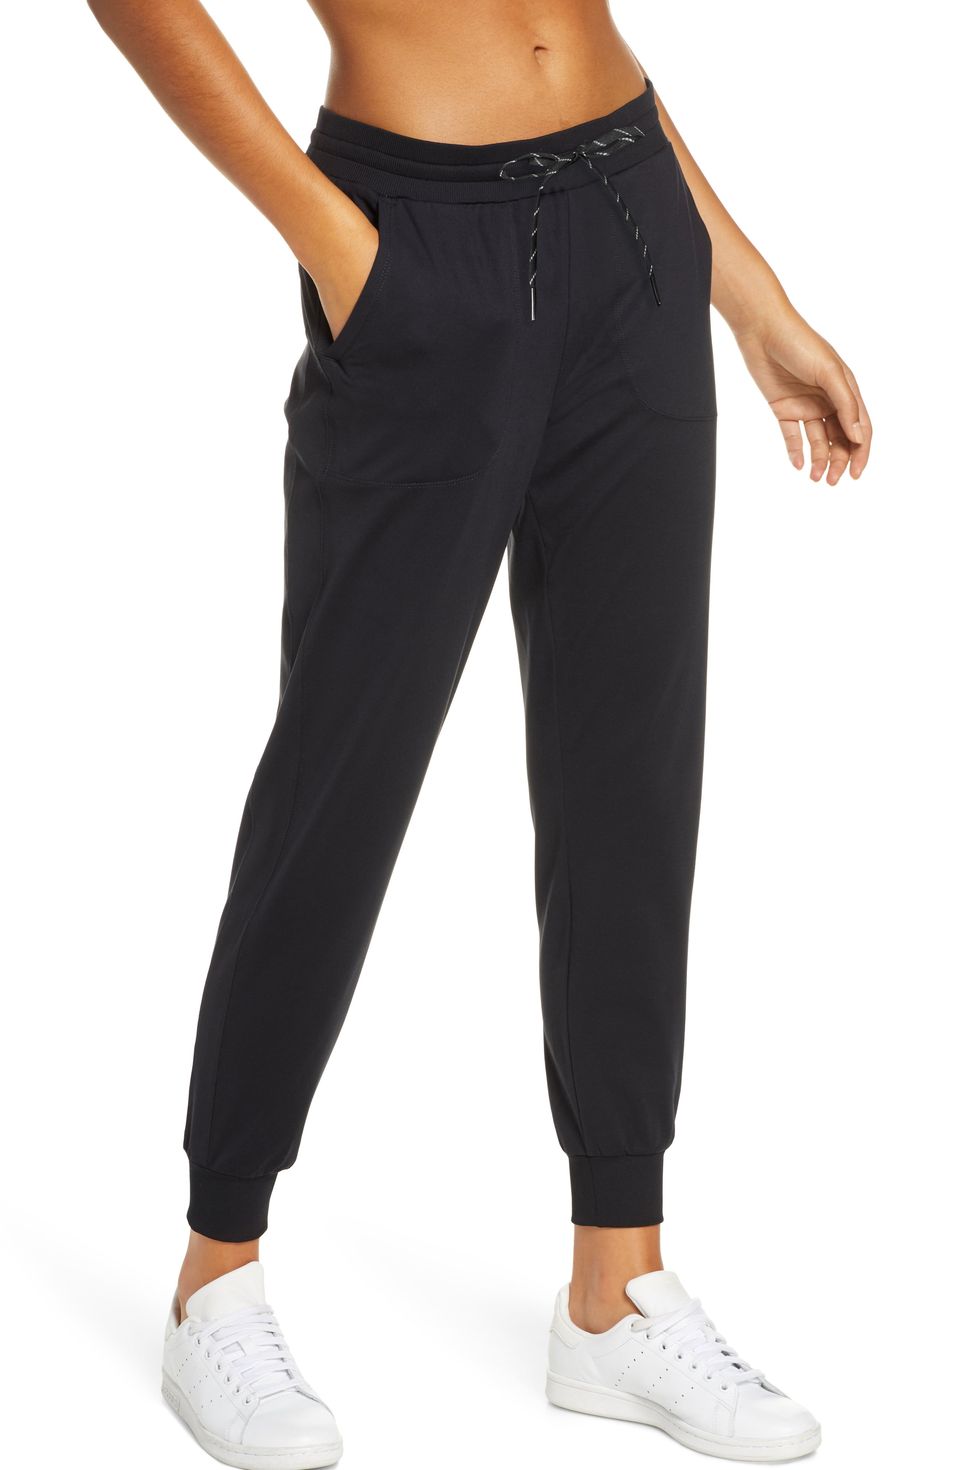 24 Best Sweatpants for Women 2021 - Comfy and Stylish Joggers